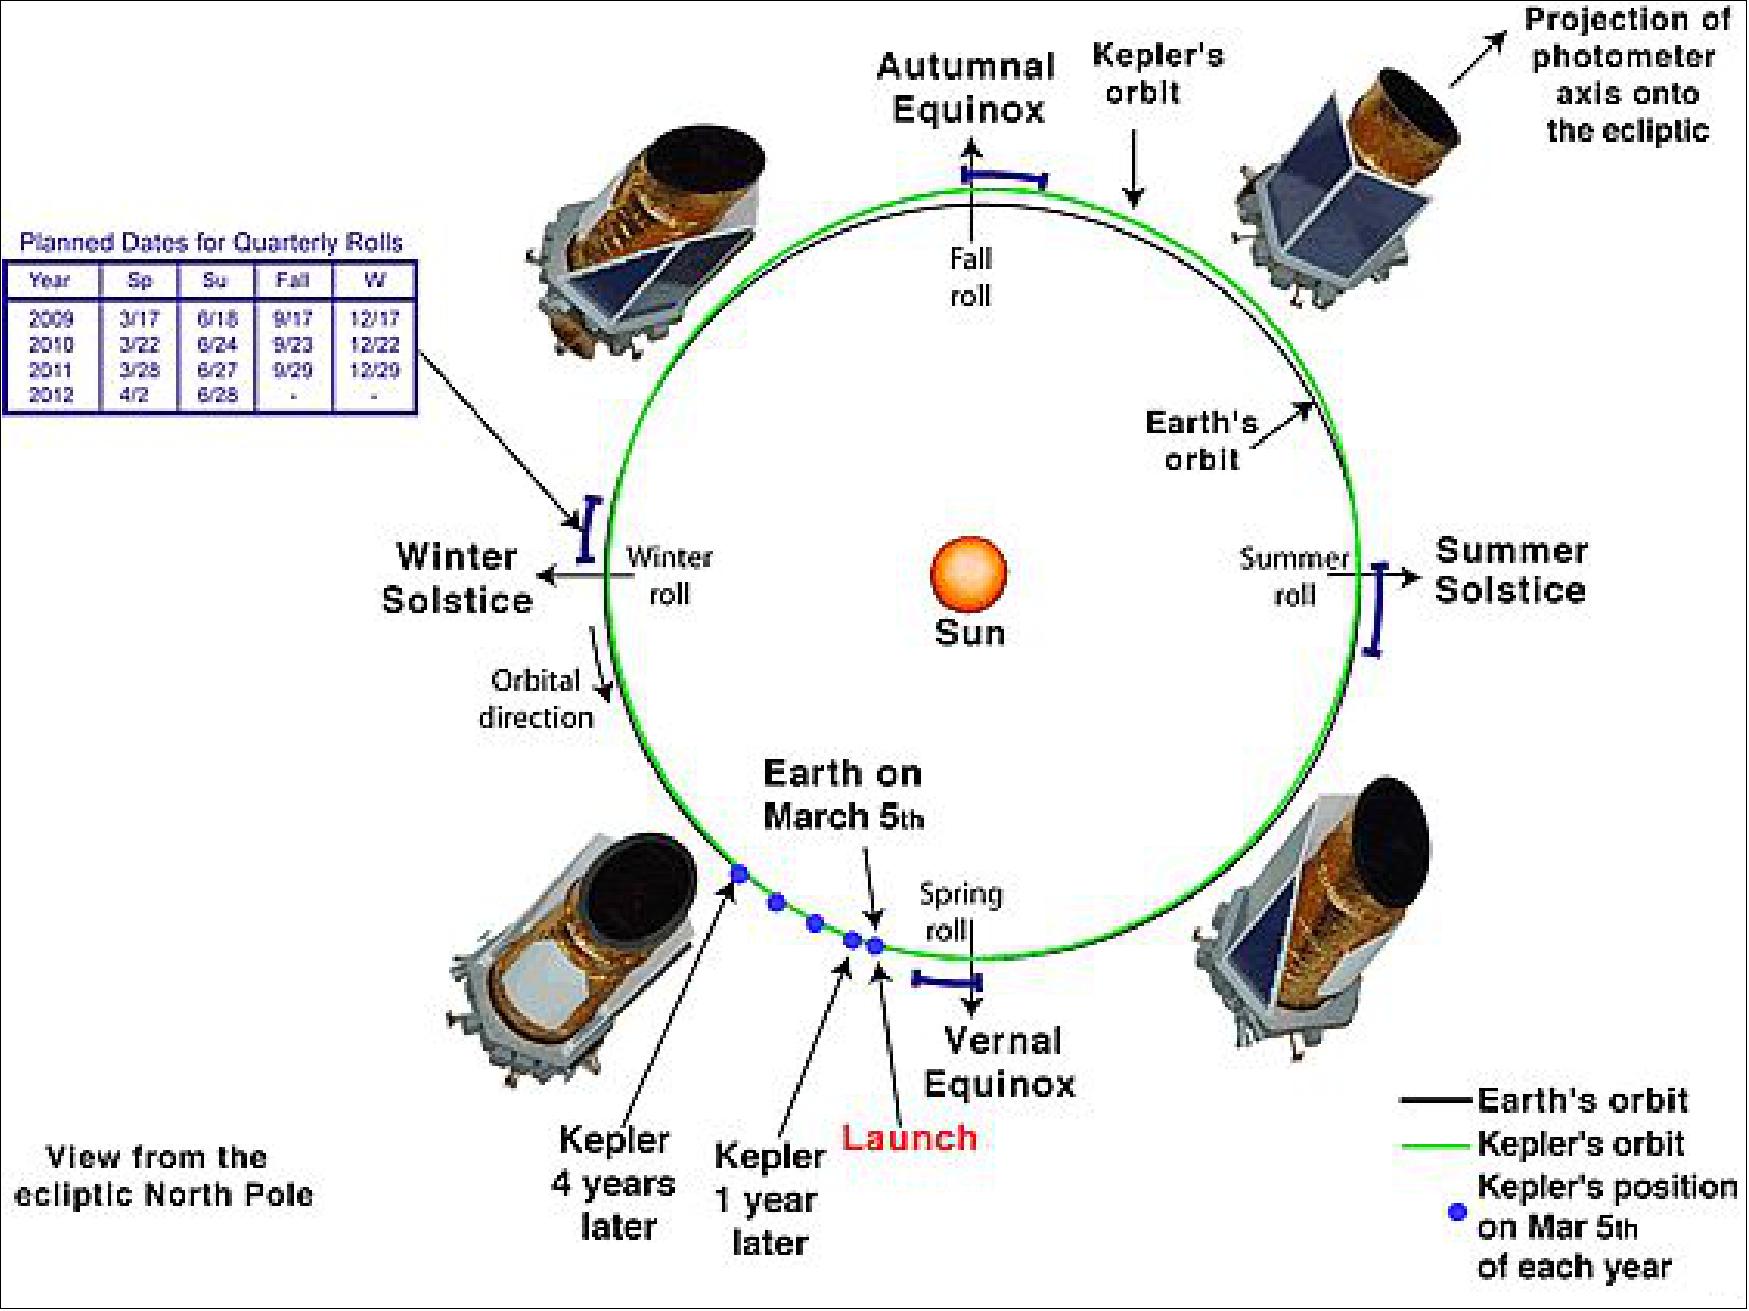 Figure 6: The spacecraft must execute a 90 degree roll every 3 months to reposition the solar panels to face the Sun while keeping the instrument aimed at the target field of view (image credit: NASA)